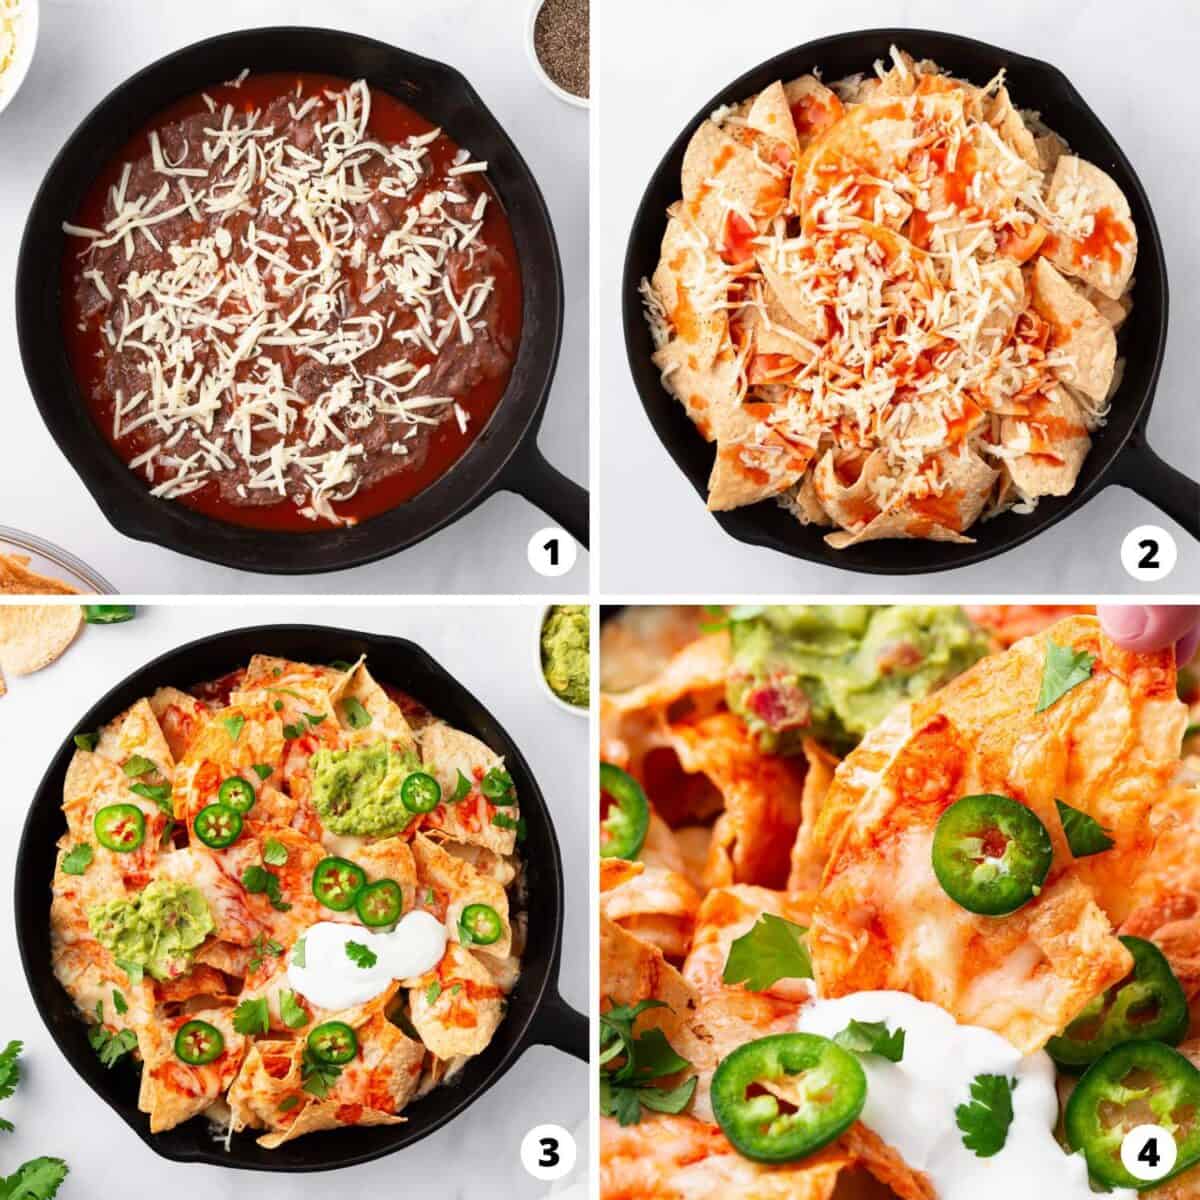 Showing how to make nachos in the oven in a 4 step collage.